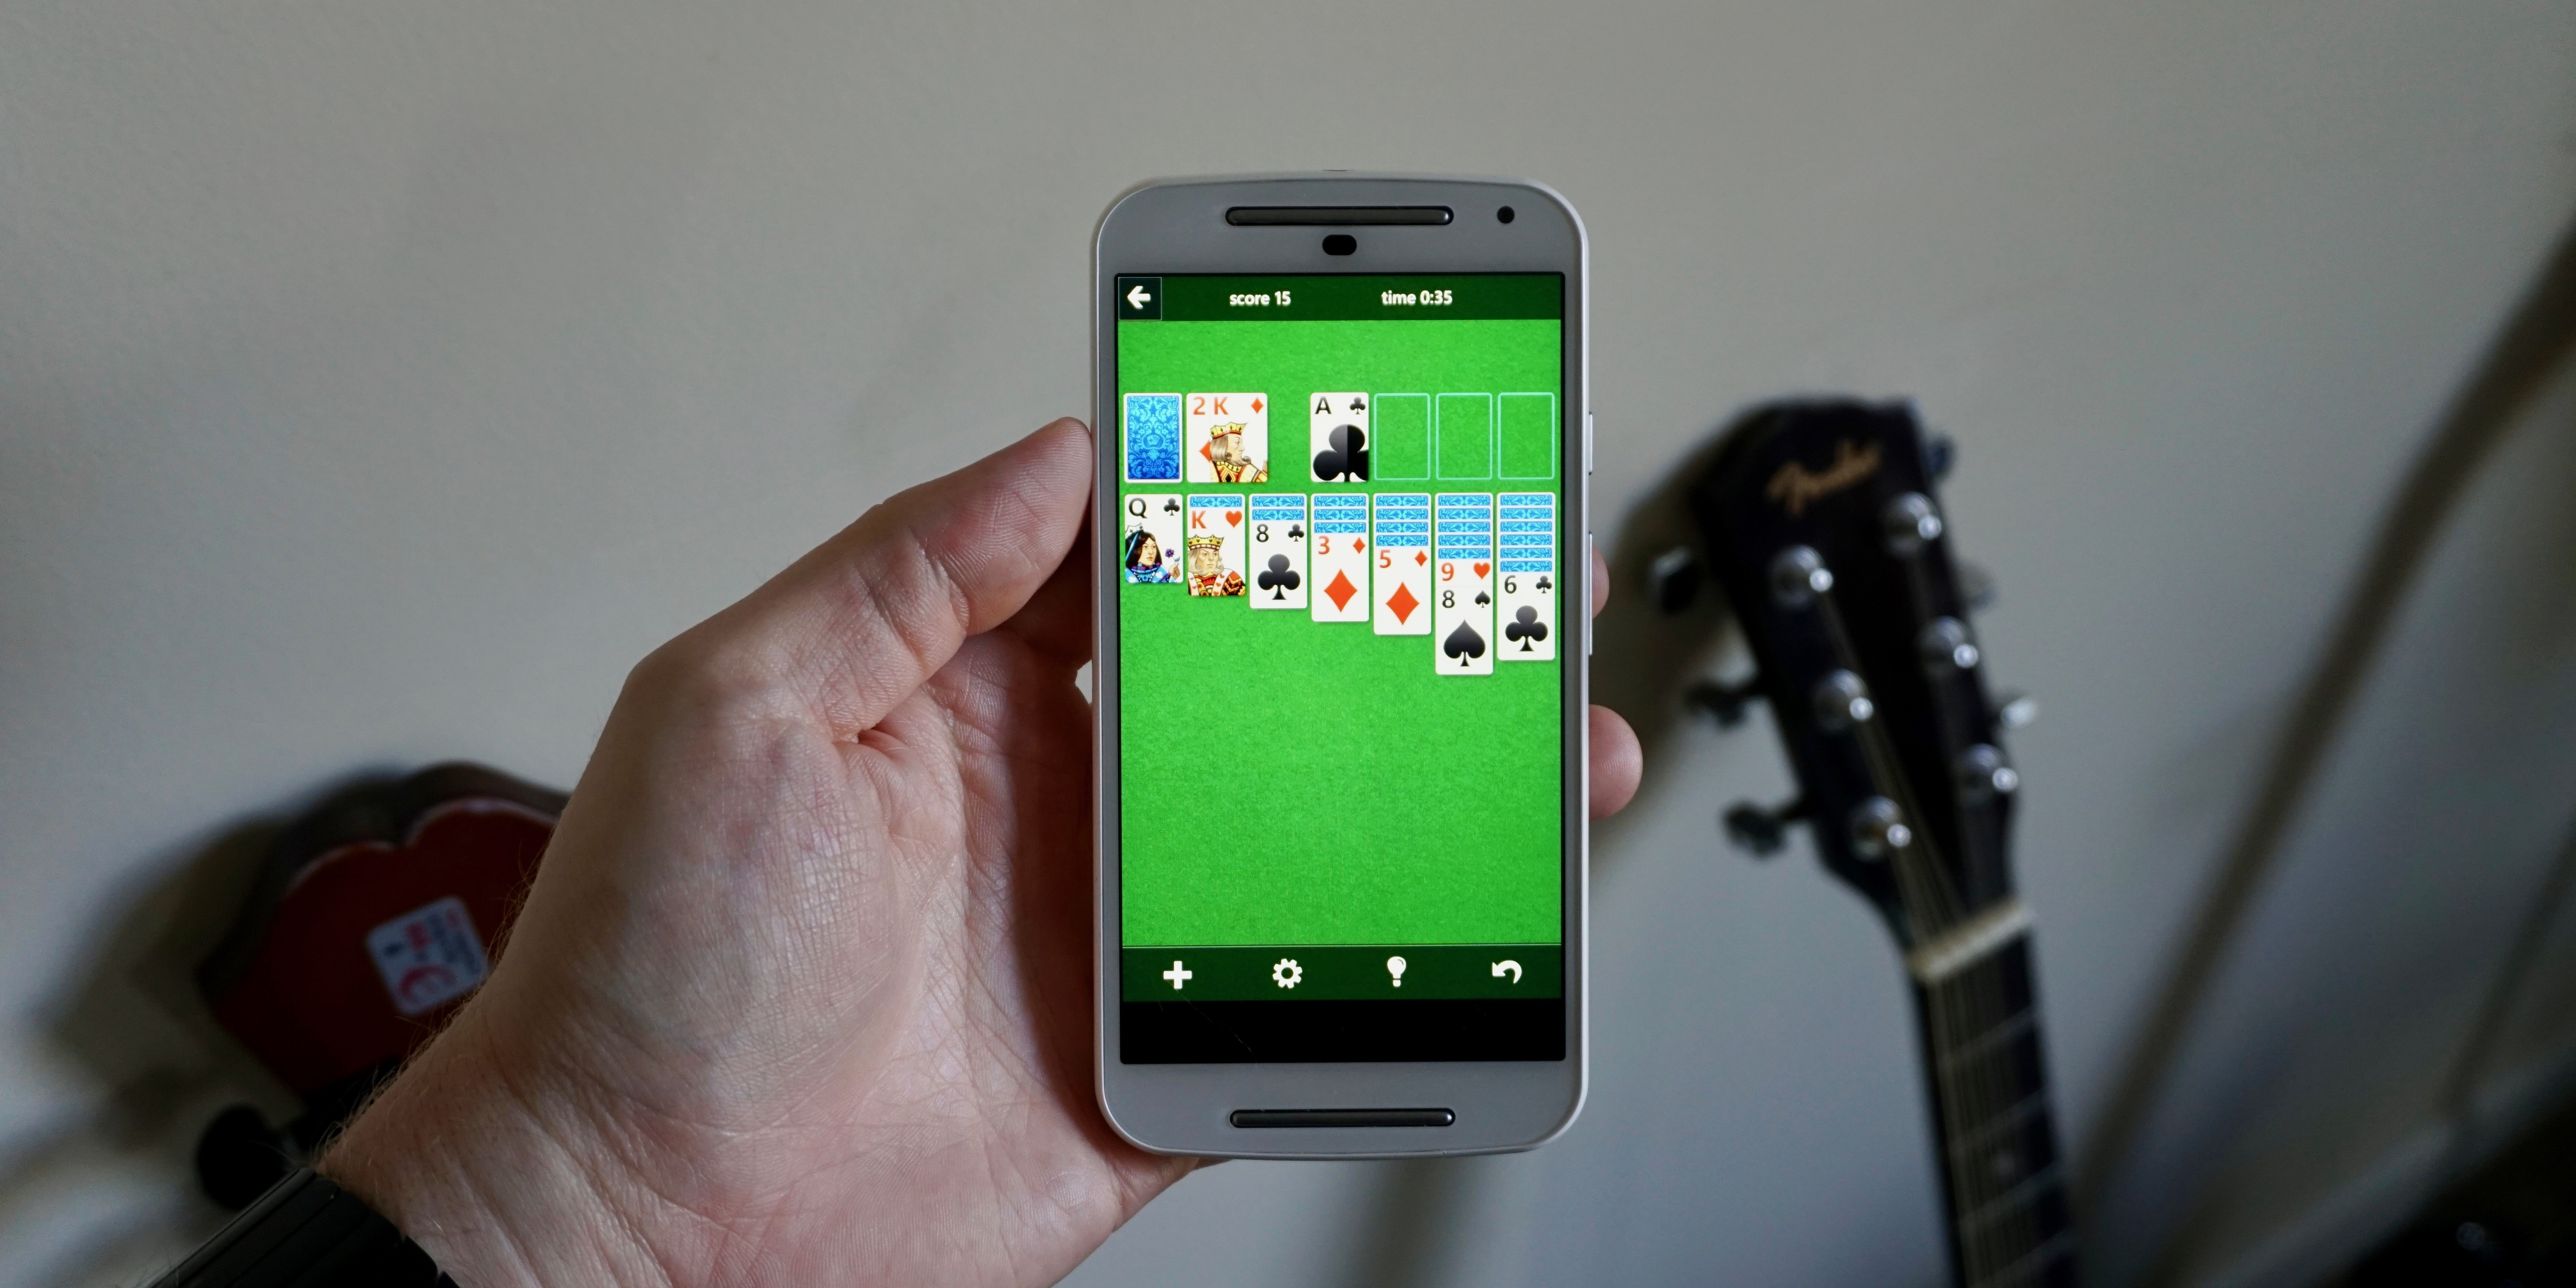 microsoft classic solitaire for android